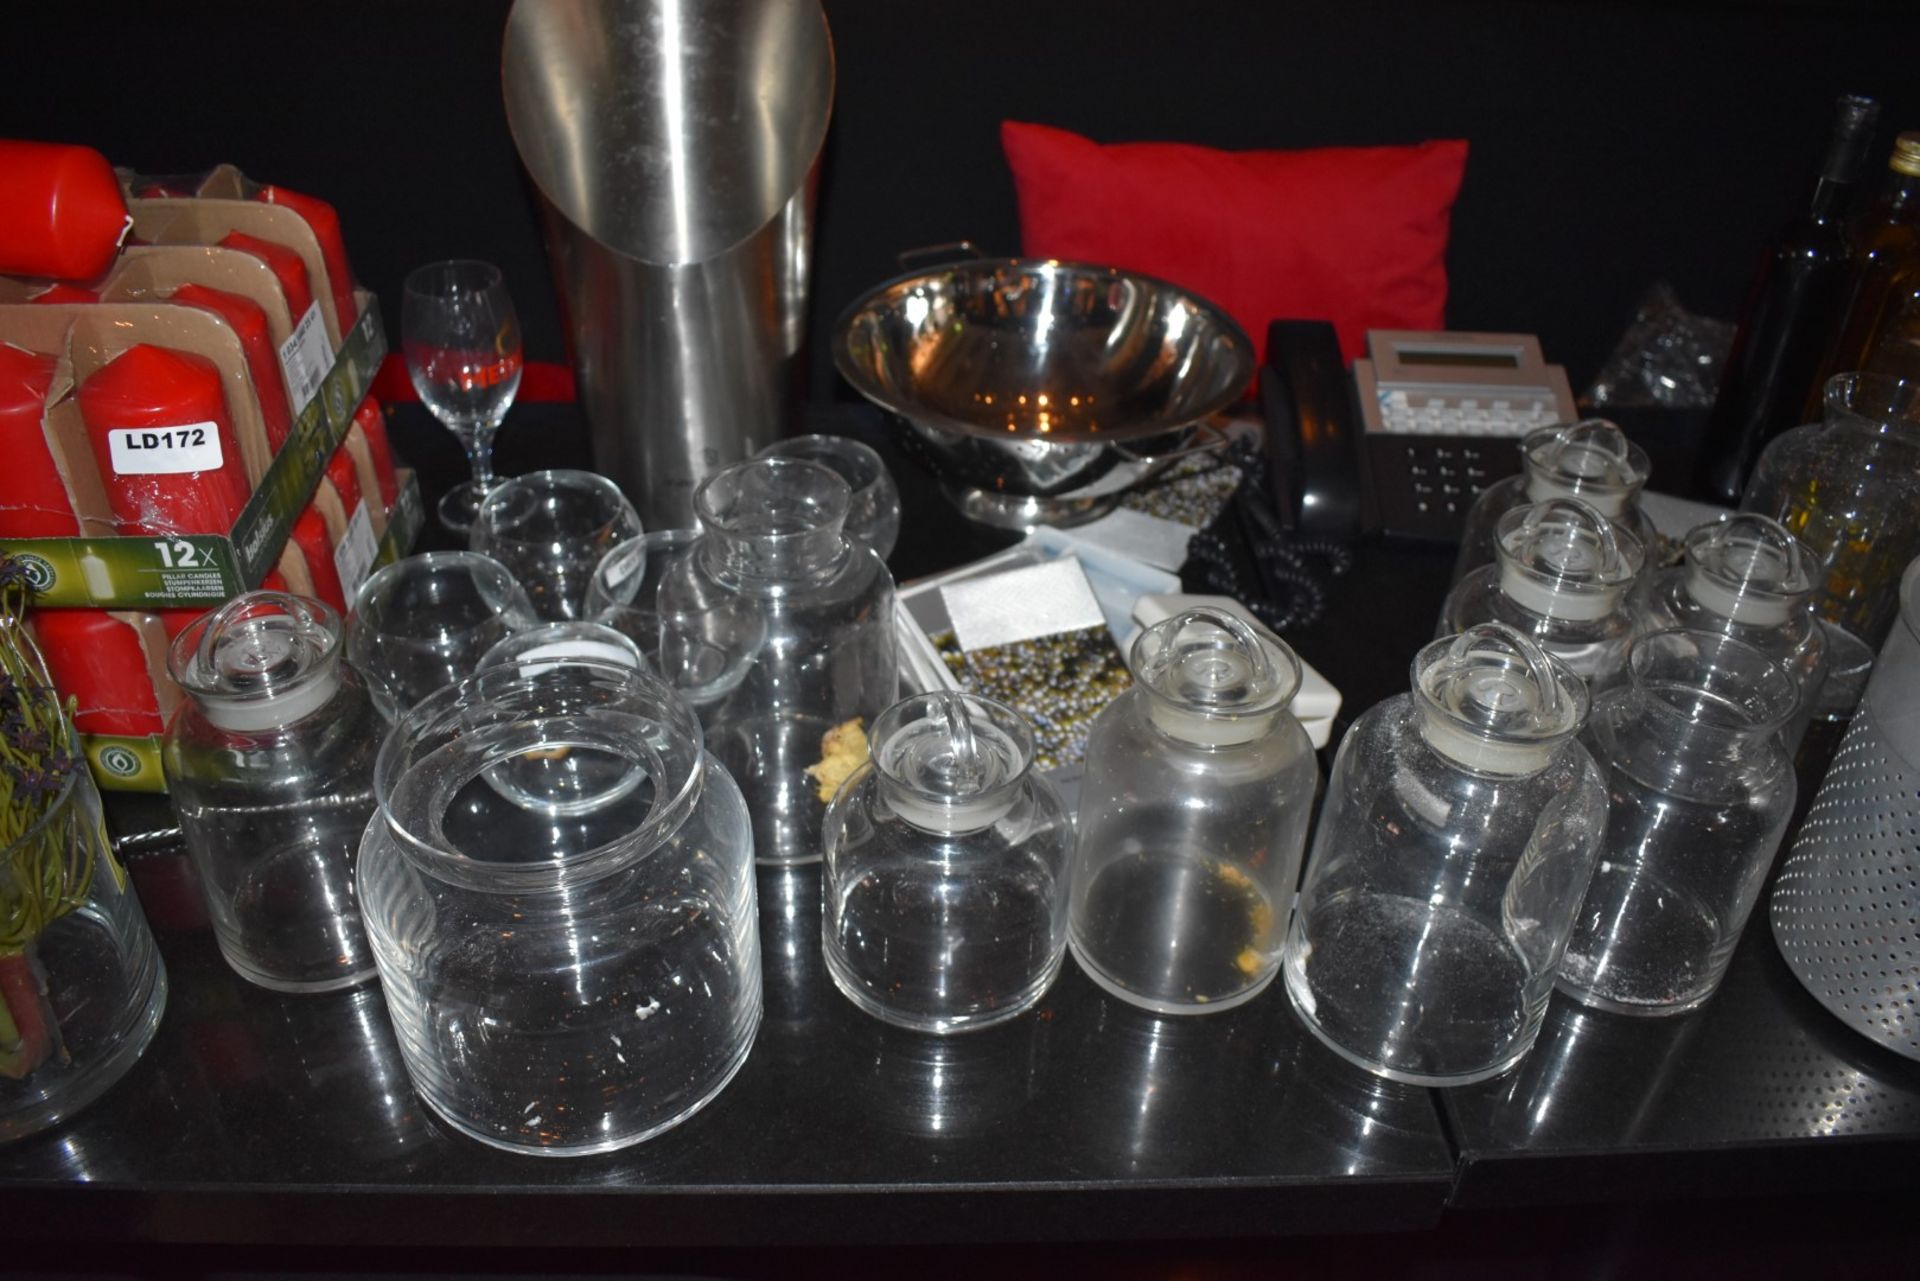 Approx 80 x Assorted Items of Various Kitchenware - Includes Pans, Utensils, Candles, Colanders, - Image 16 of 21